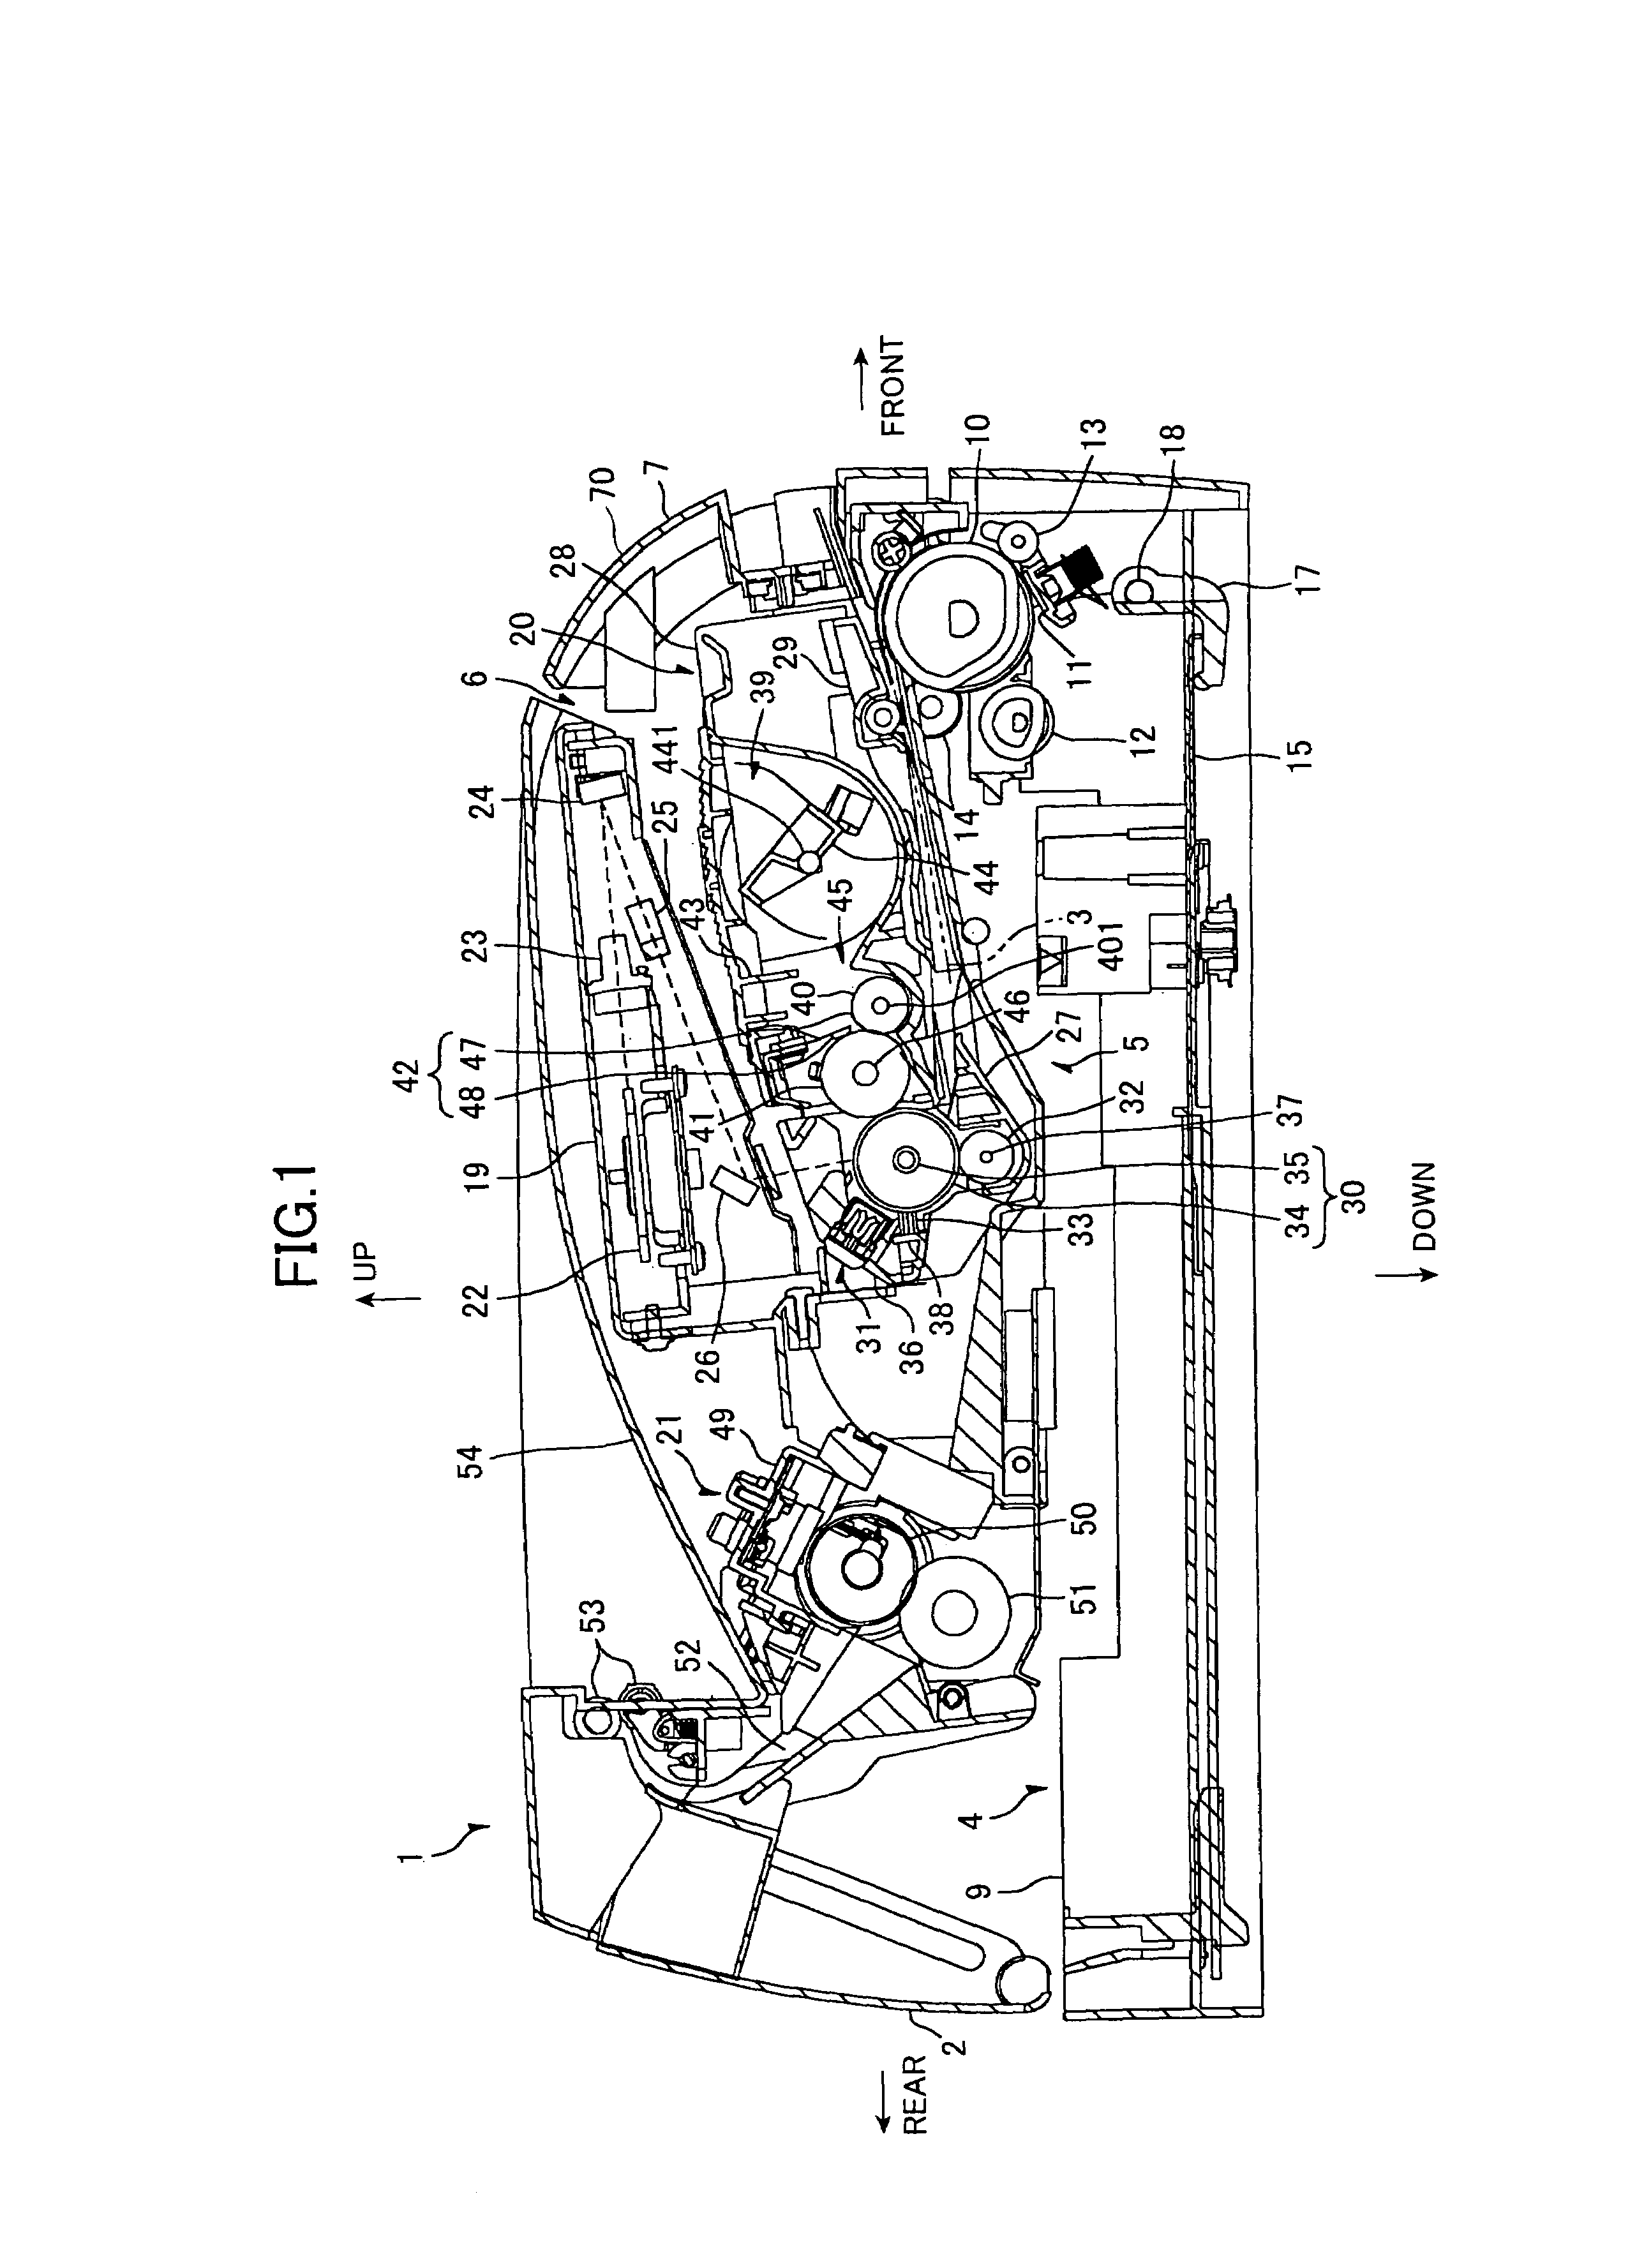 Image-forming device and process cartridge